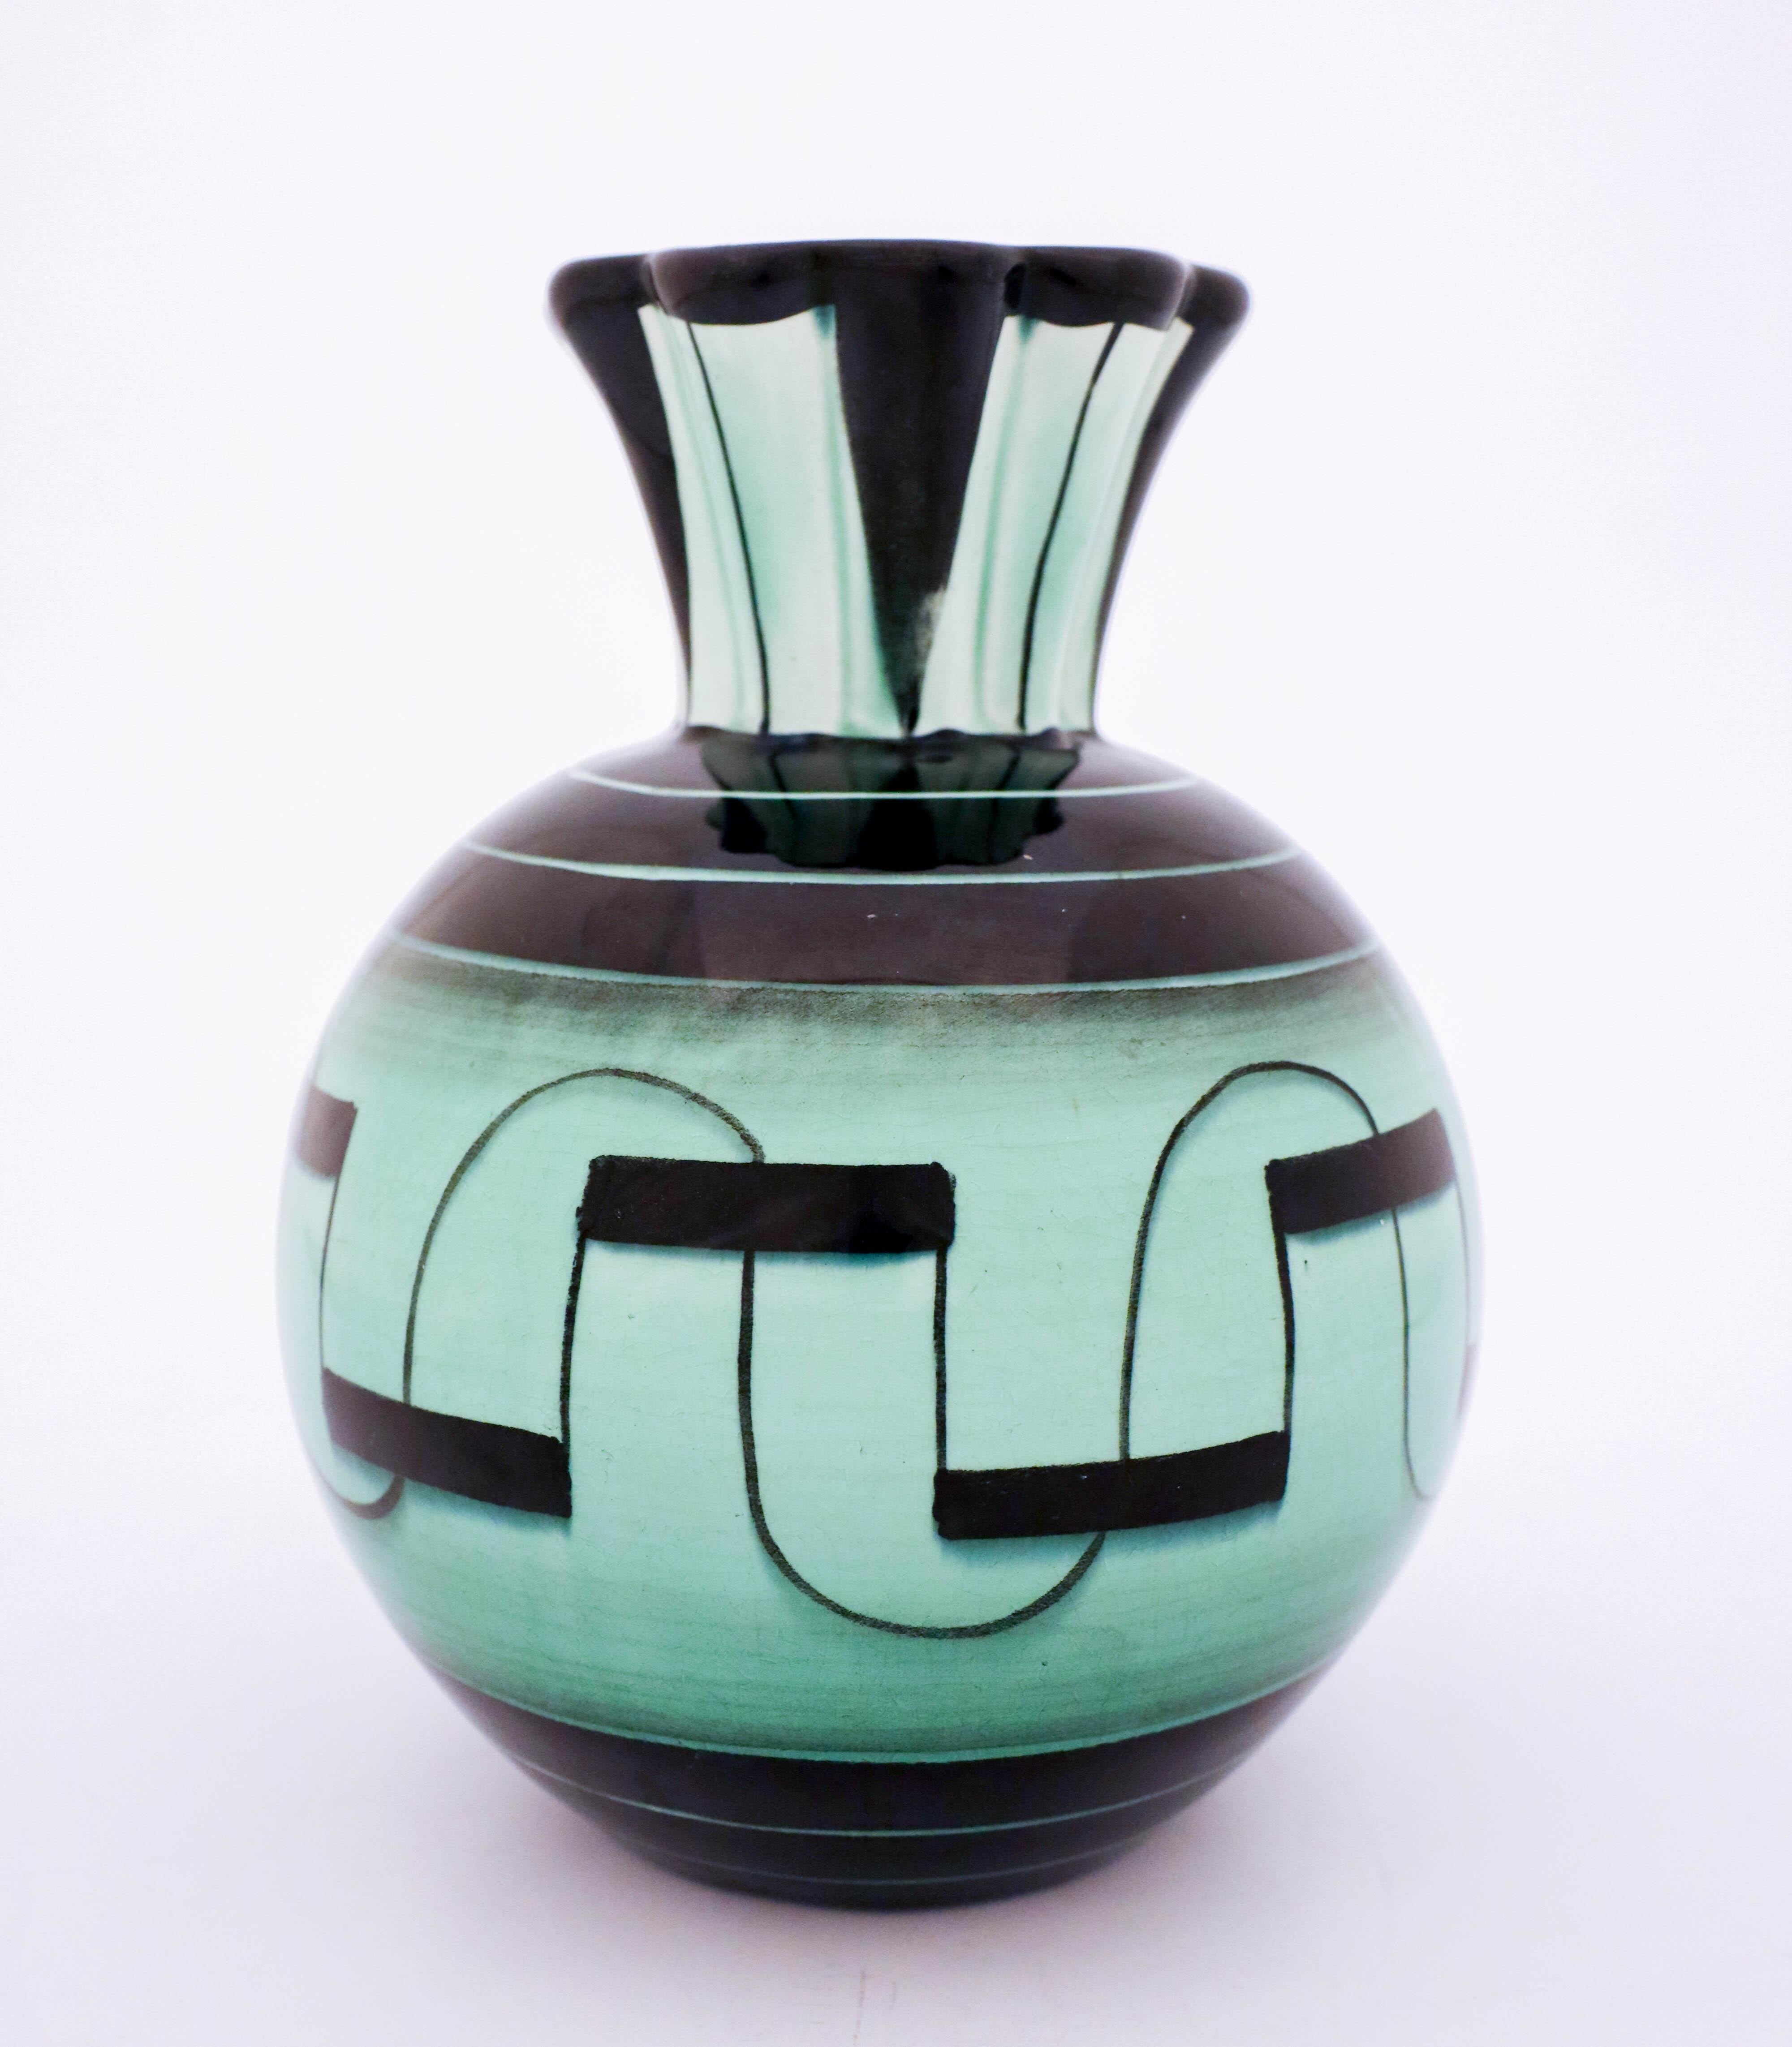 A lovely vase designed by Ilse Claesson in the 1930s at Rörstrand, Sweden. It is 22 cm high and in very good condition except from some craquelure in the glaze because of the age.